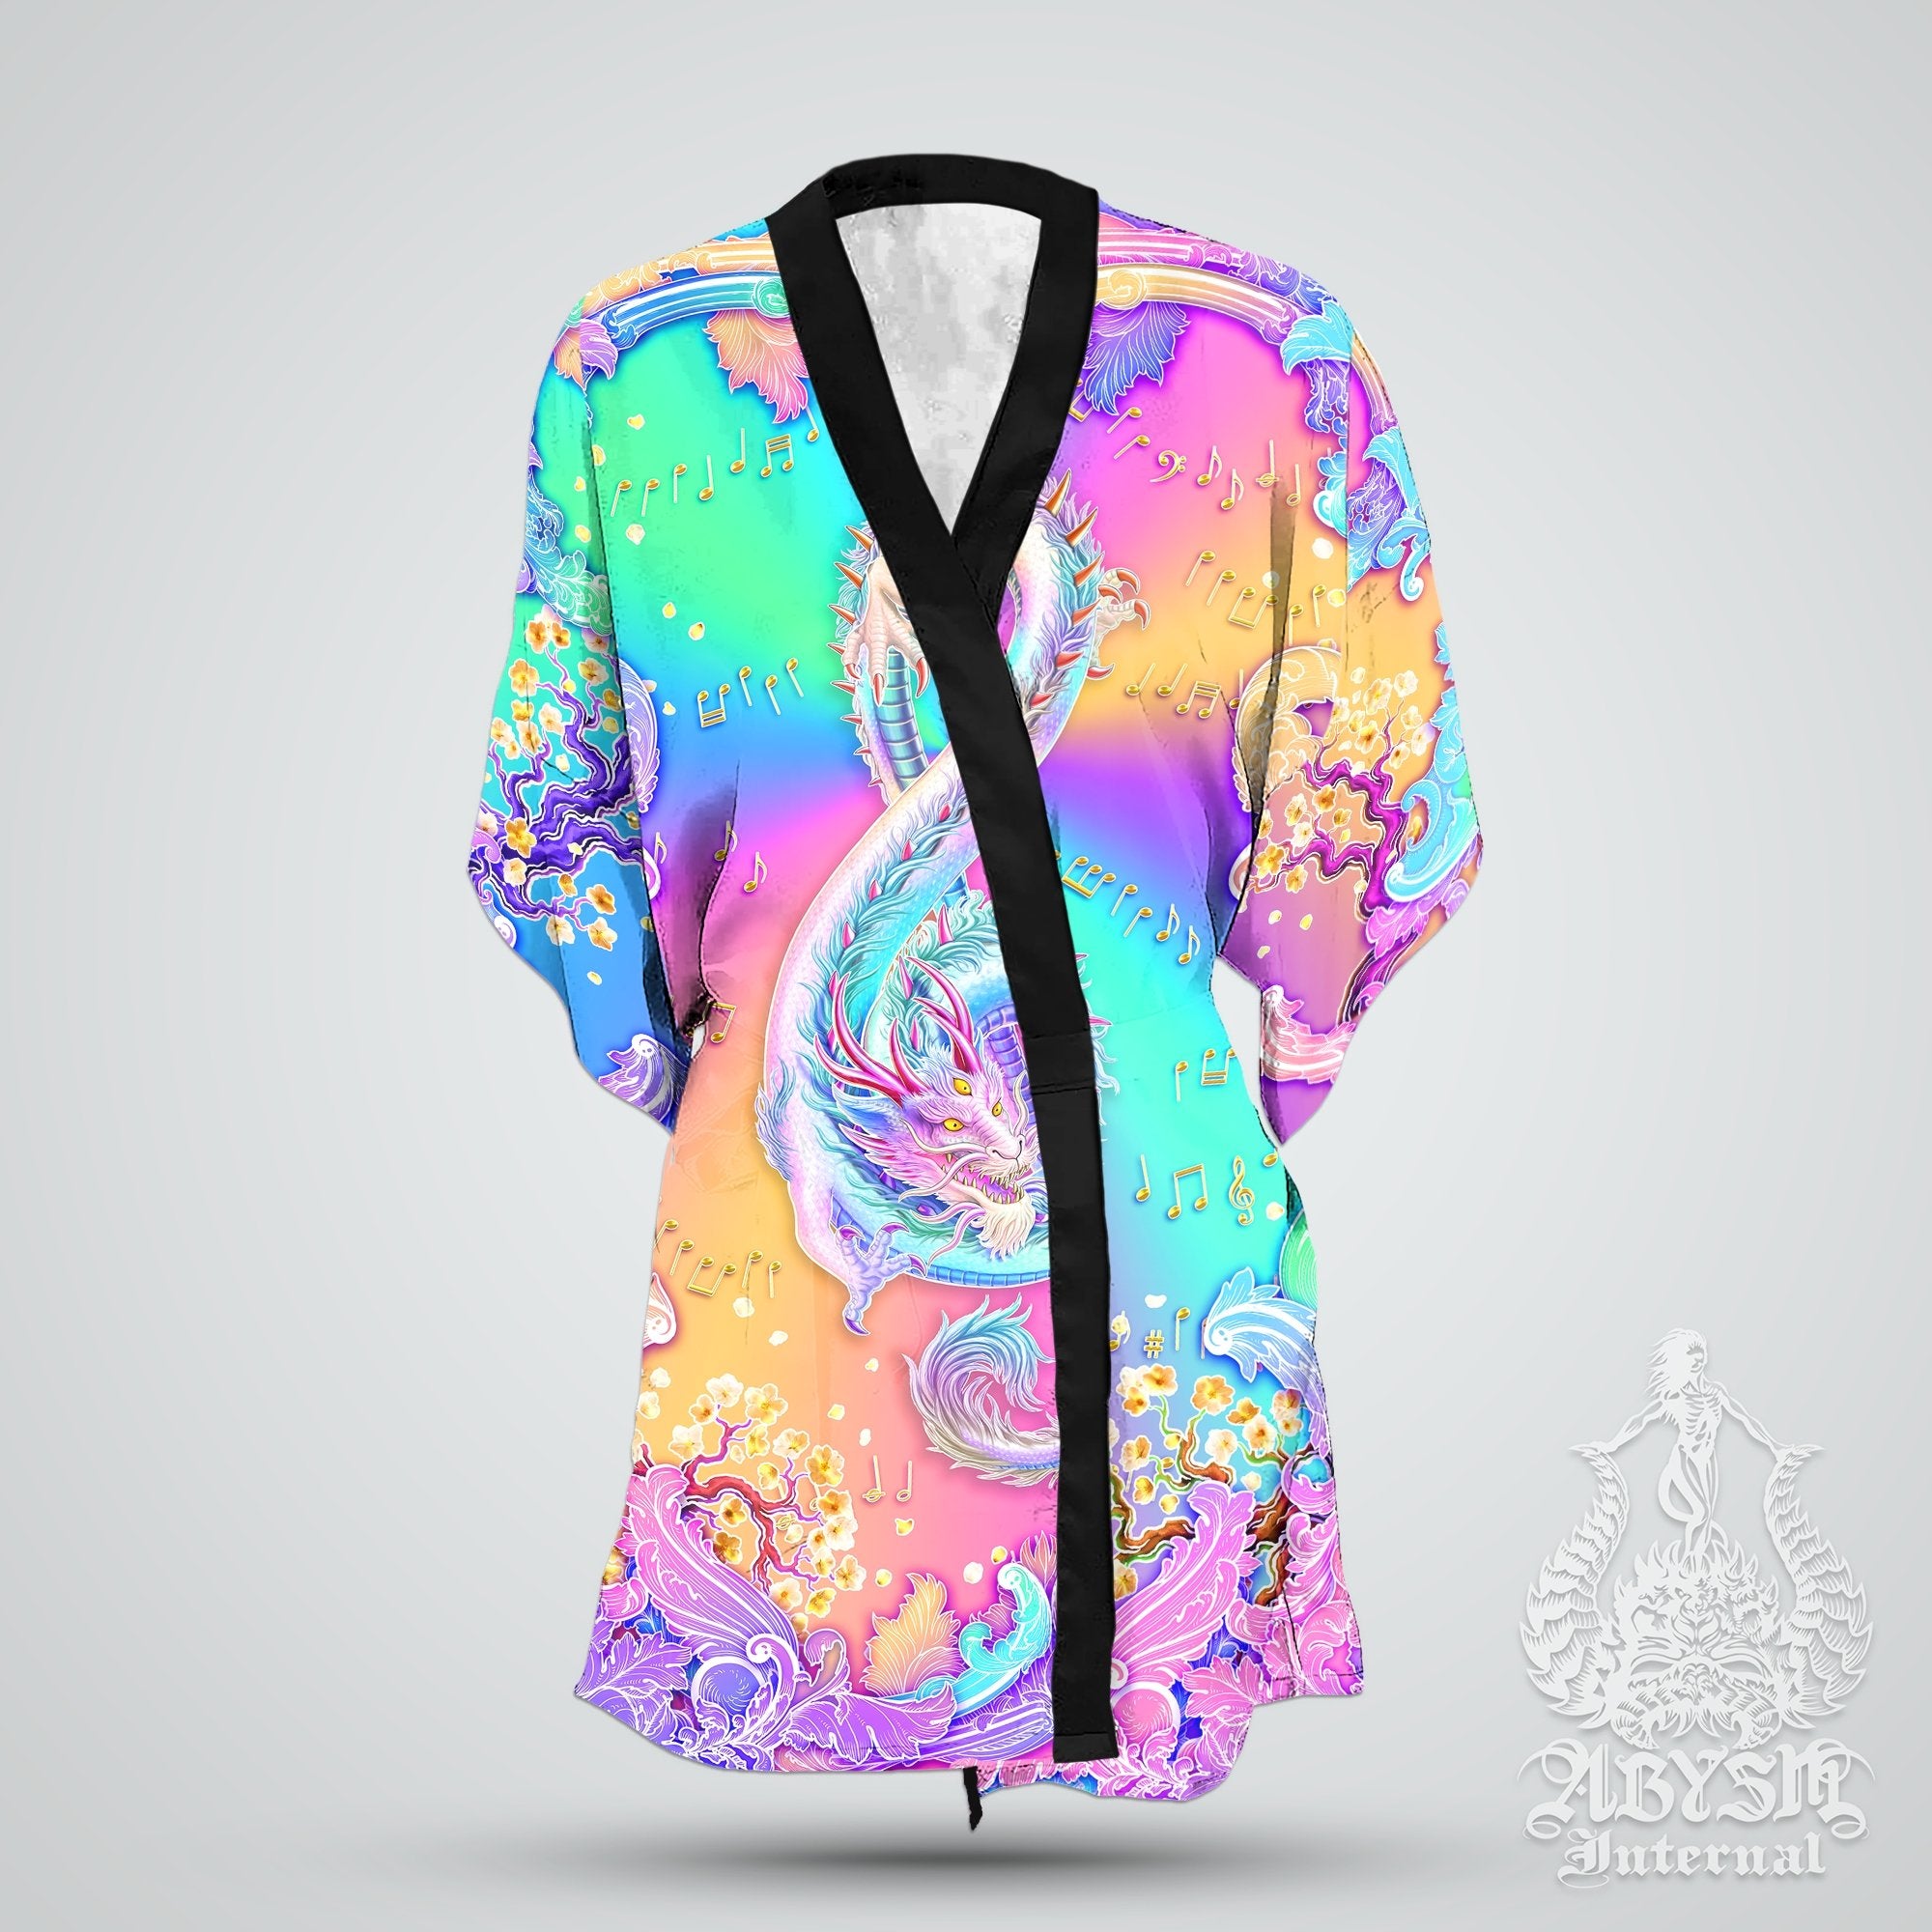 Music Cover Up, Beach Rave Outfit, Party Kimono, Summer Festival Robe, Aesthetic Indie and Alternative Clothing, Unisex - Dragon, Holographic Pastel II - Abysm Internal